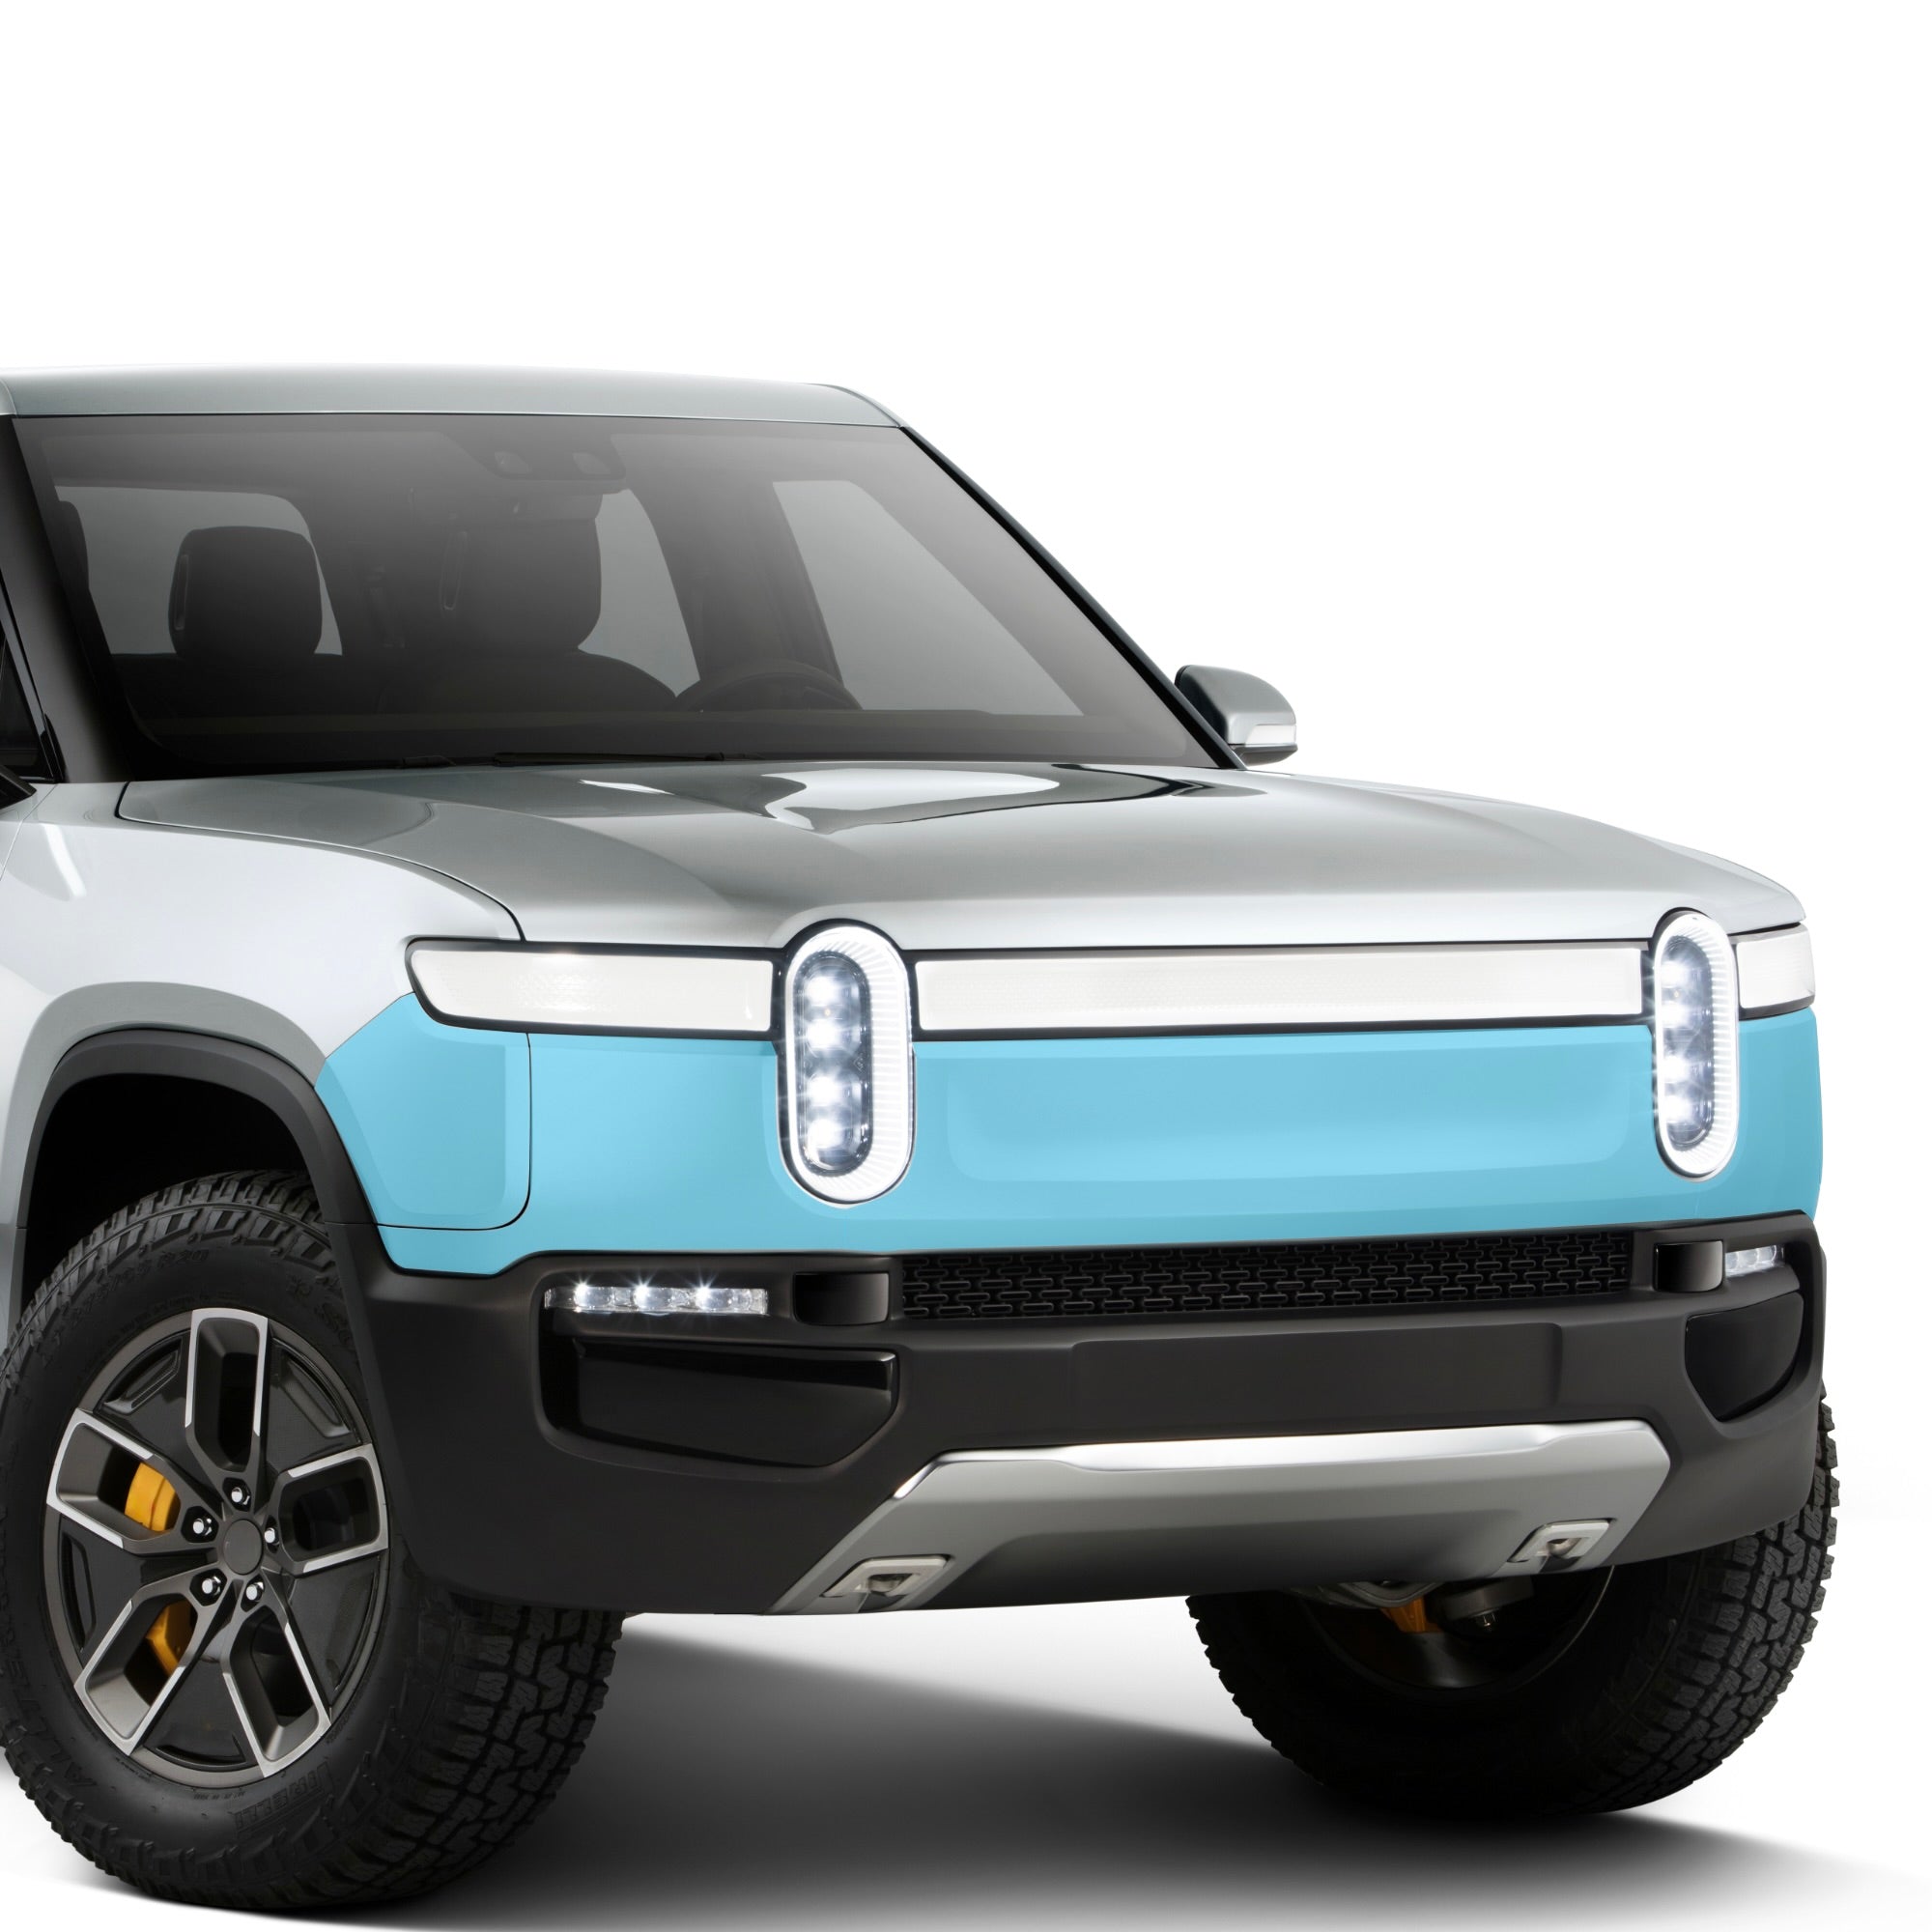 Aftermarket accessories for Rivian R1T – TWRAPS